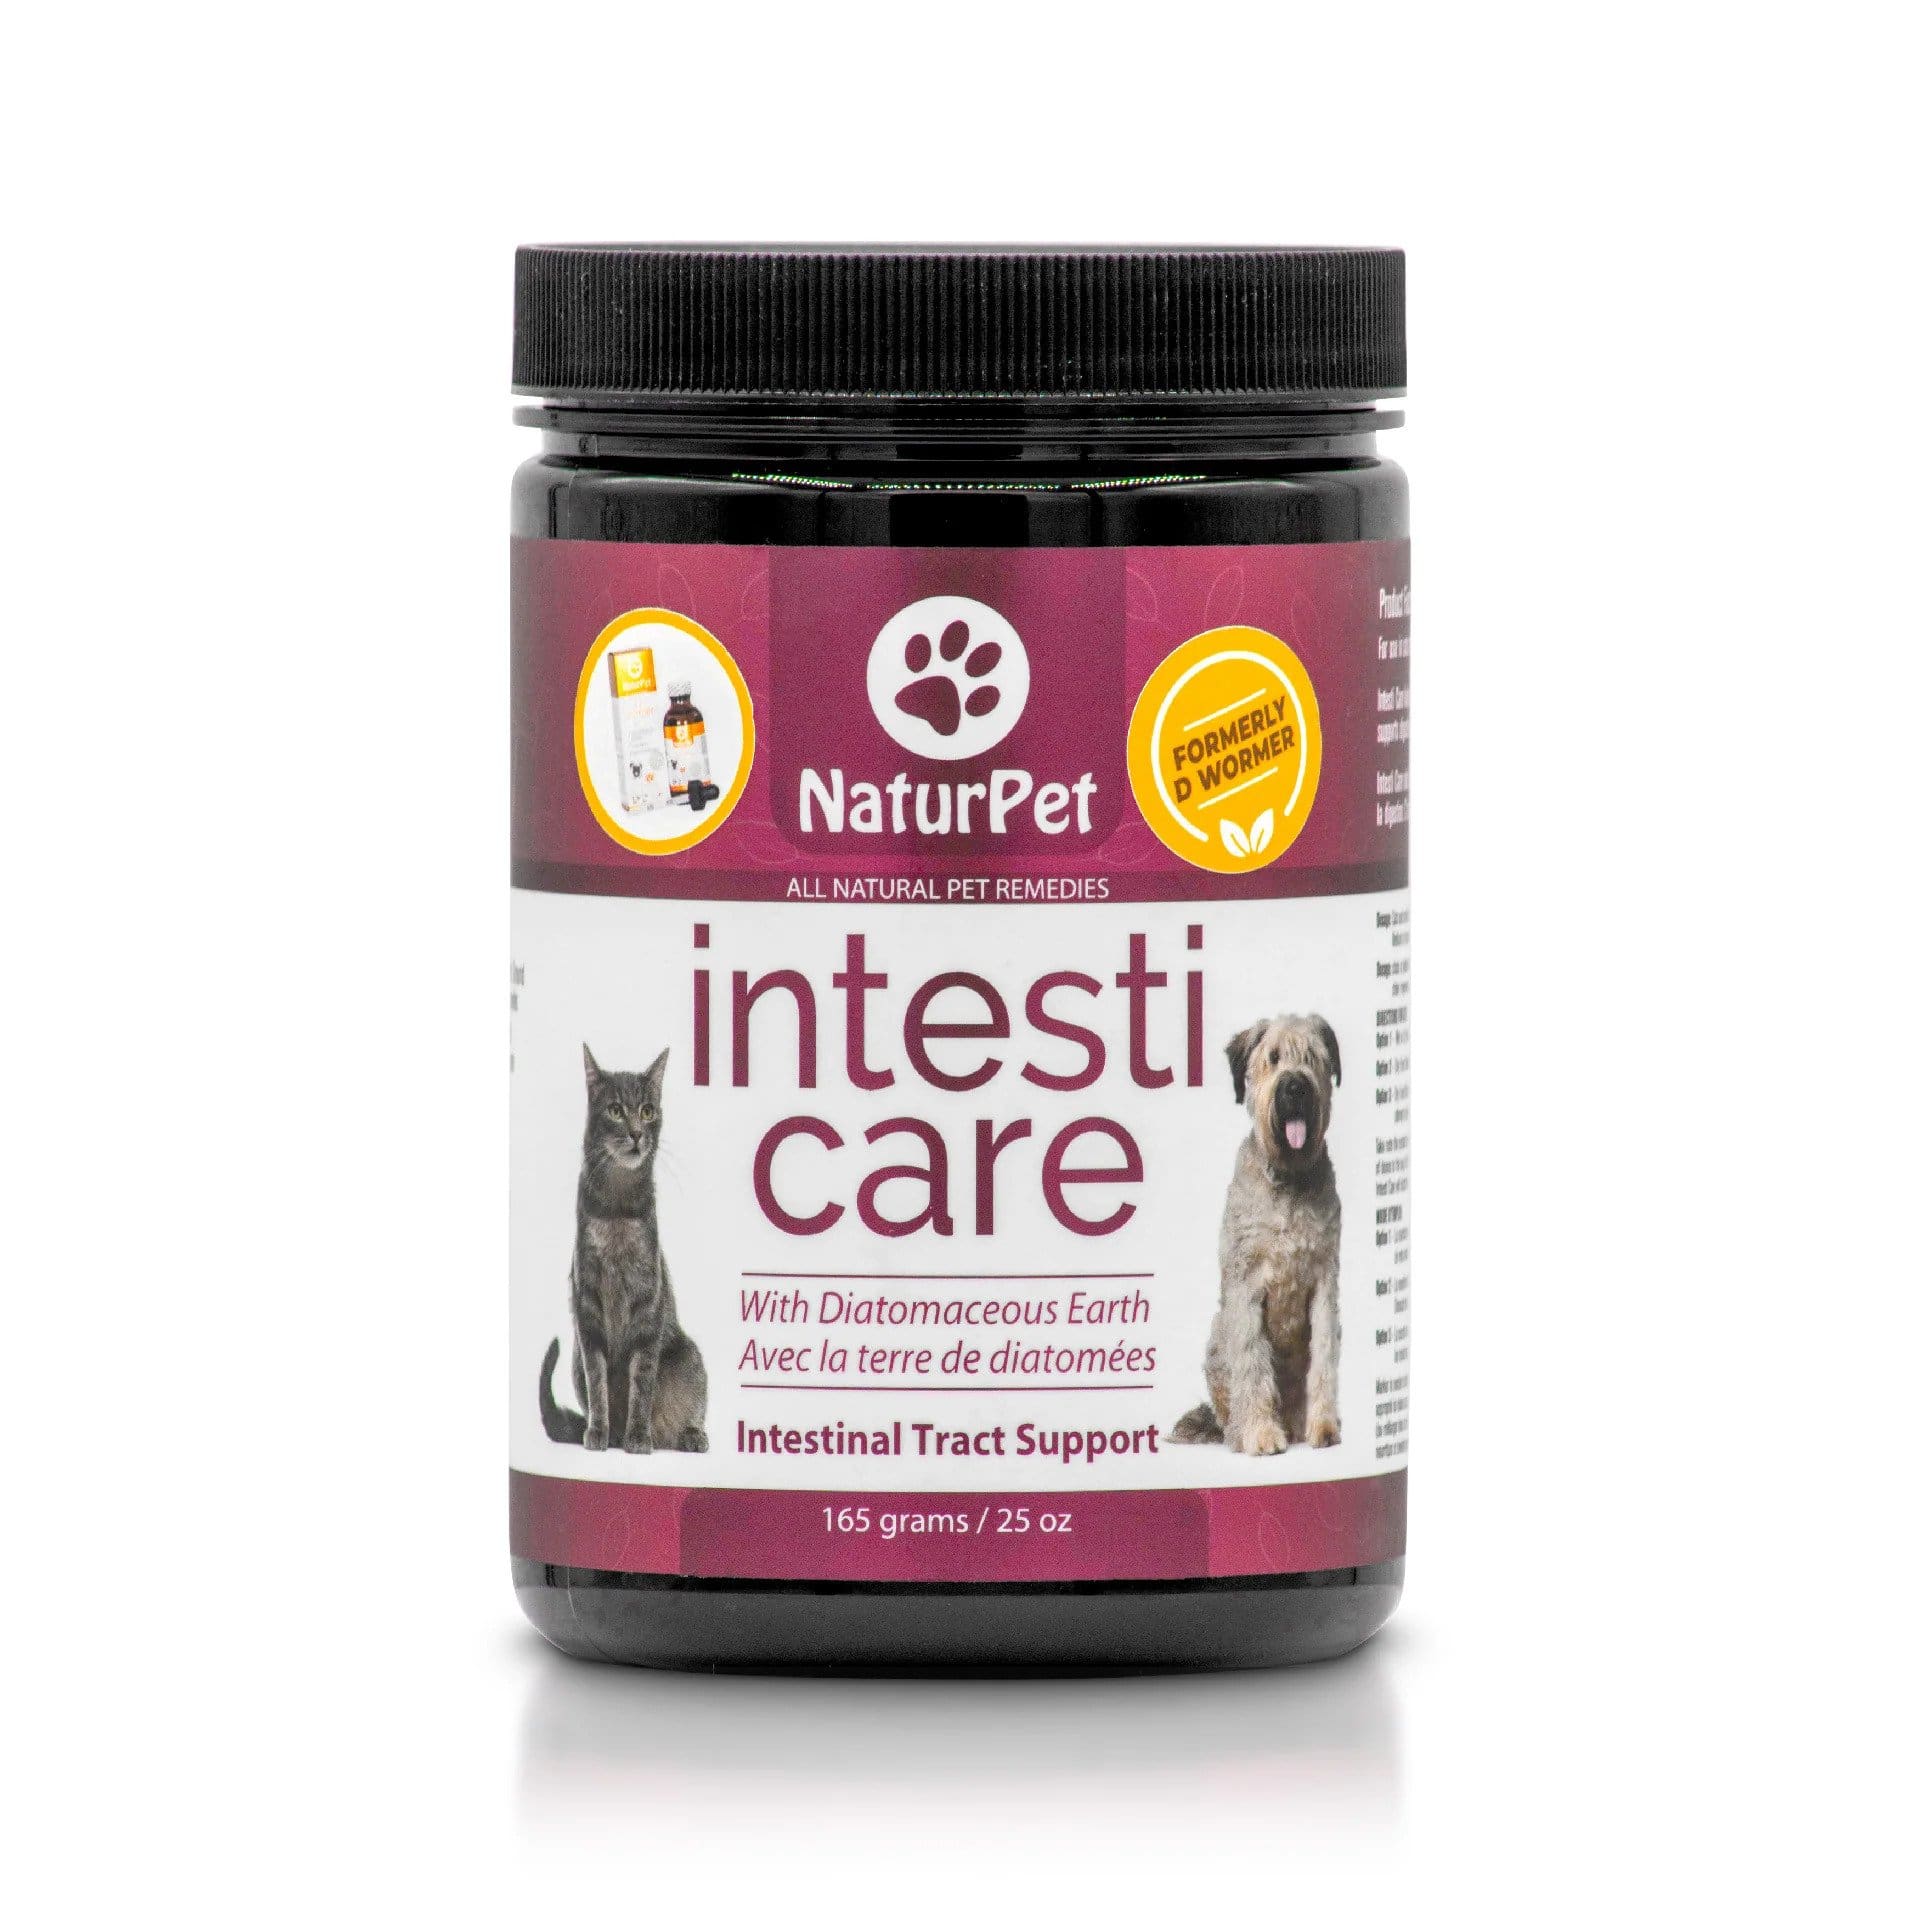 NaturPet Intesti Care - For Intestinal Health & Support Actual